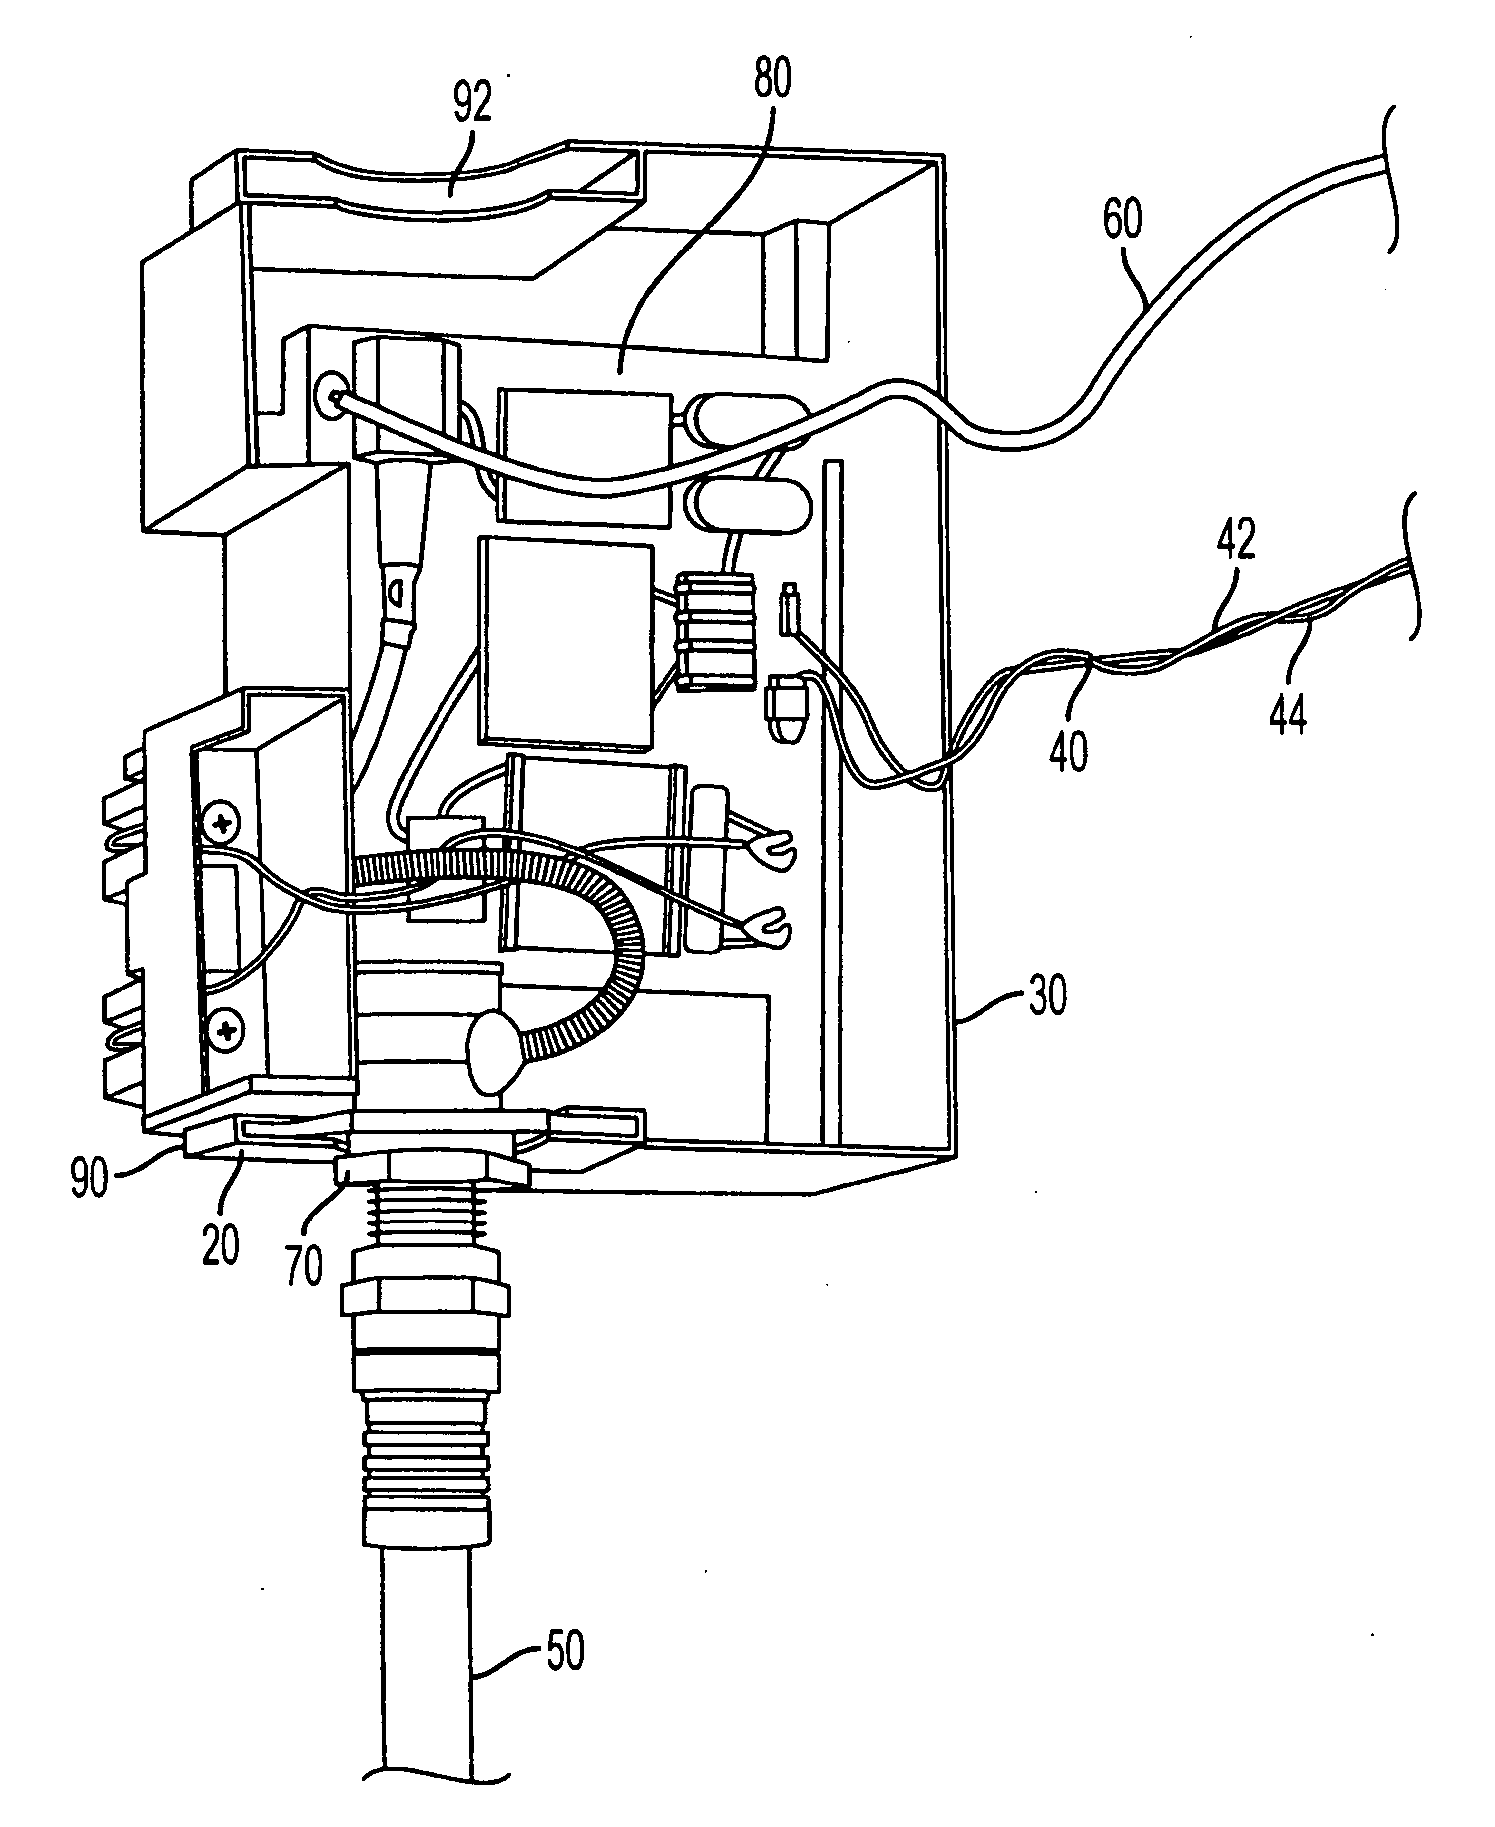 Splitter balun apparatus and method for variable connector directions